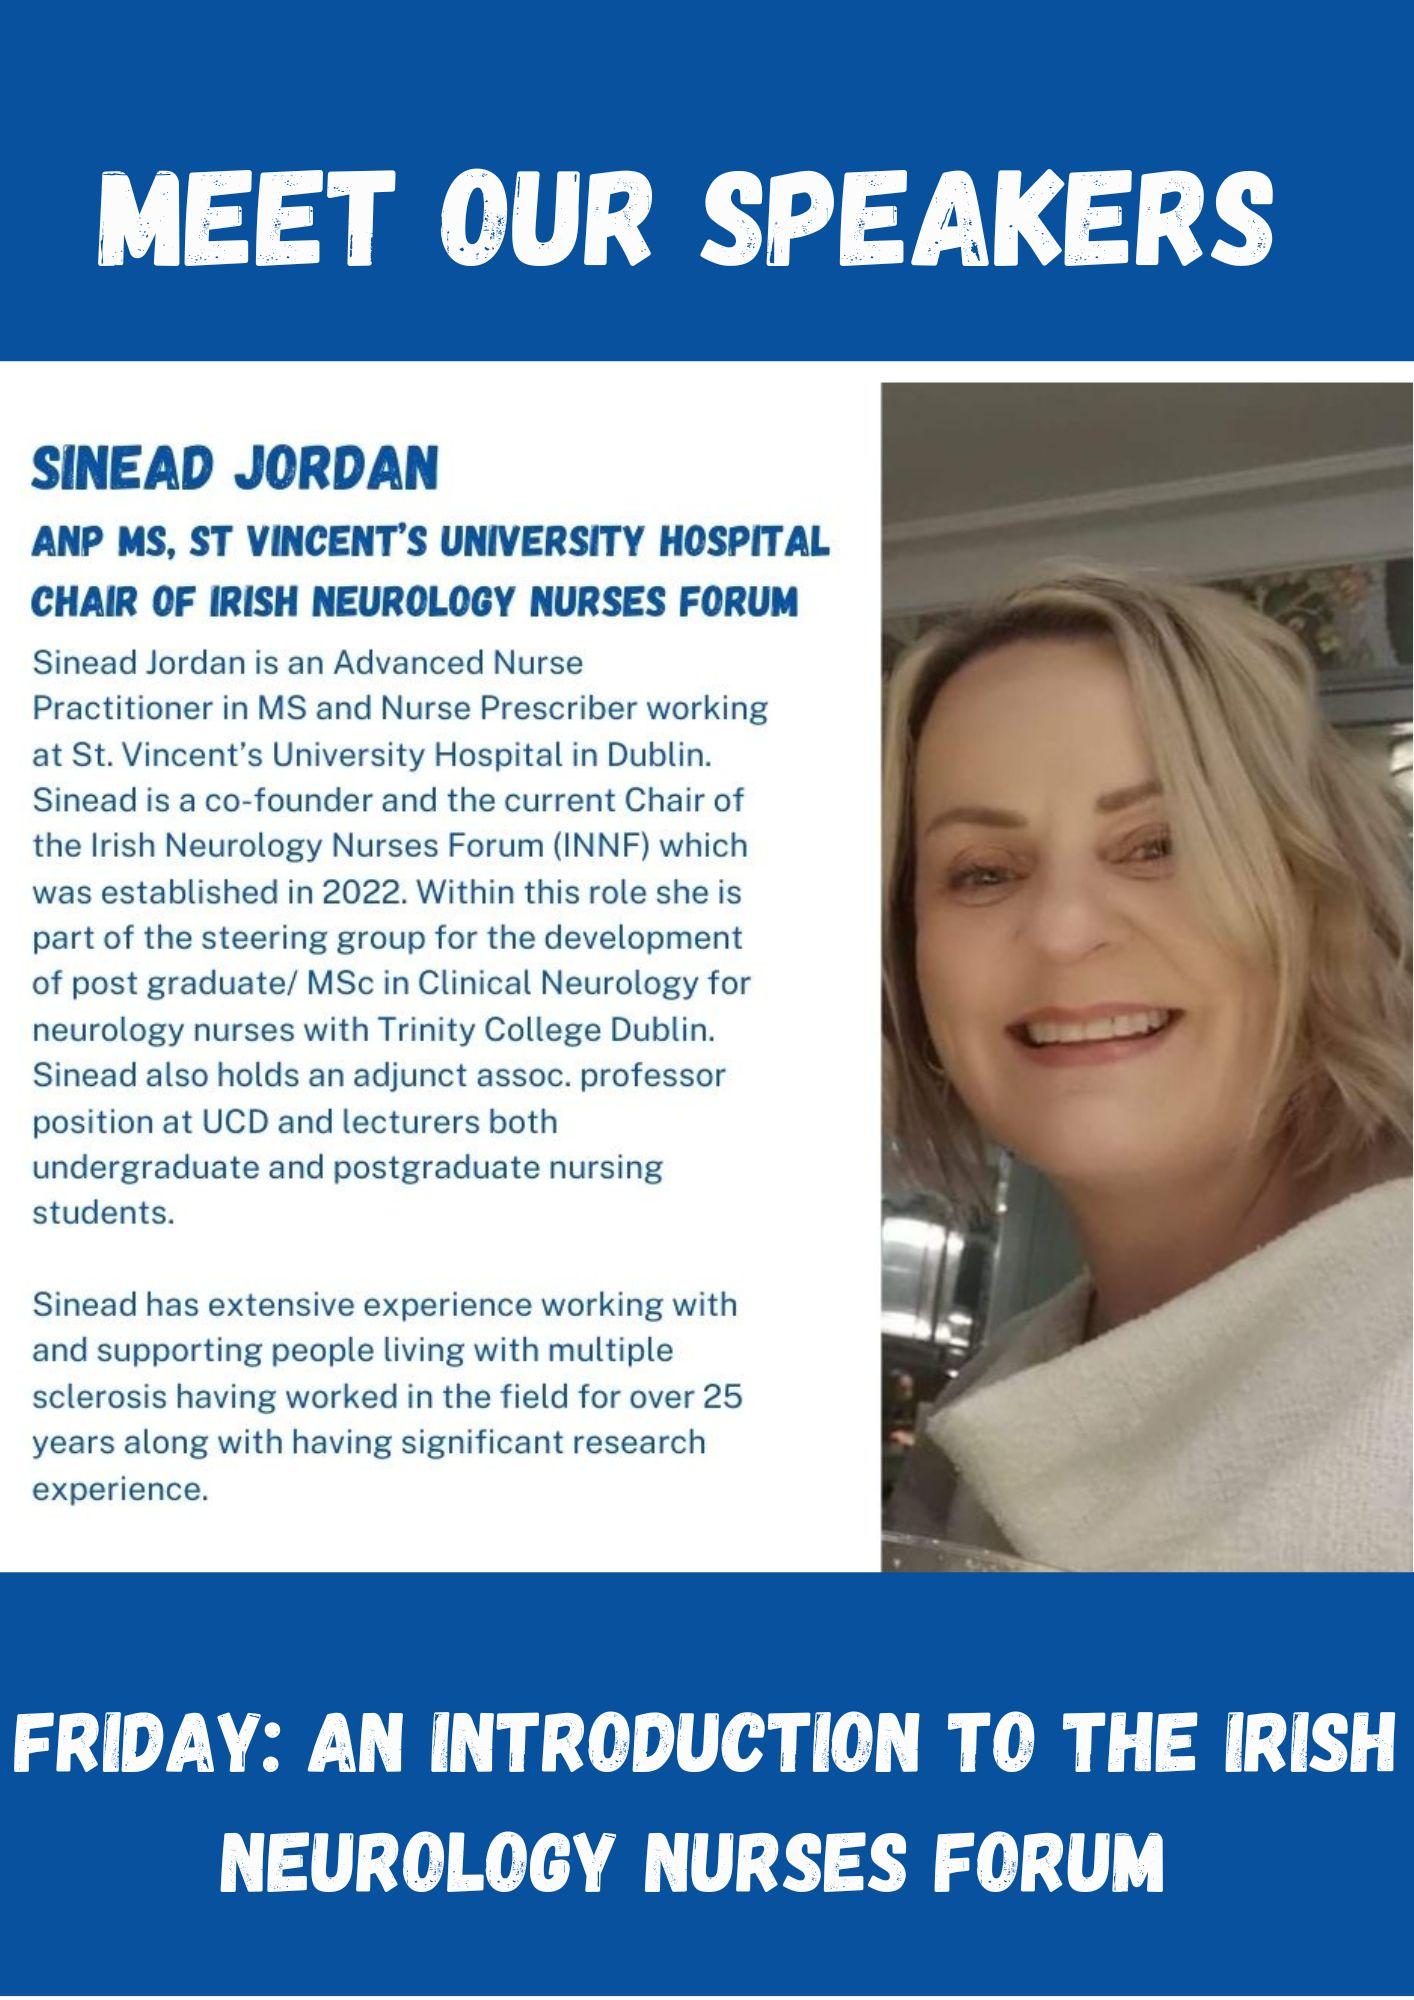 image of Sinead Jordan with blue text on white background